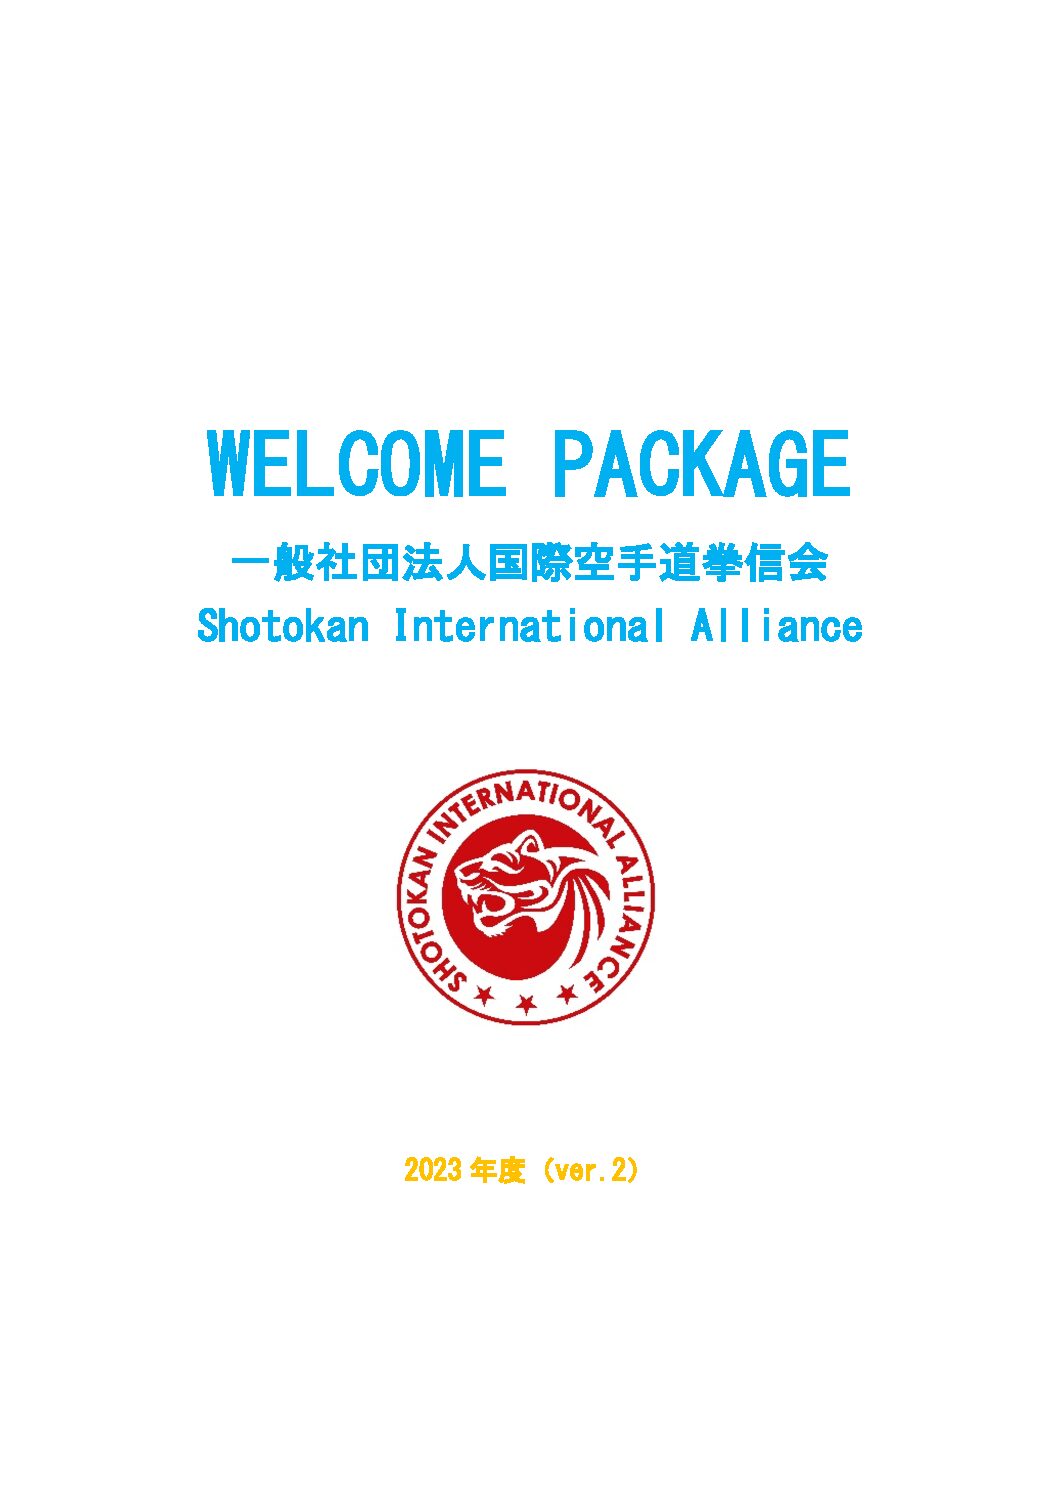 WELCOME-PACKAGE_ver2023_ver2表紙